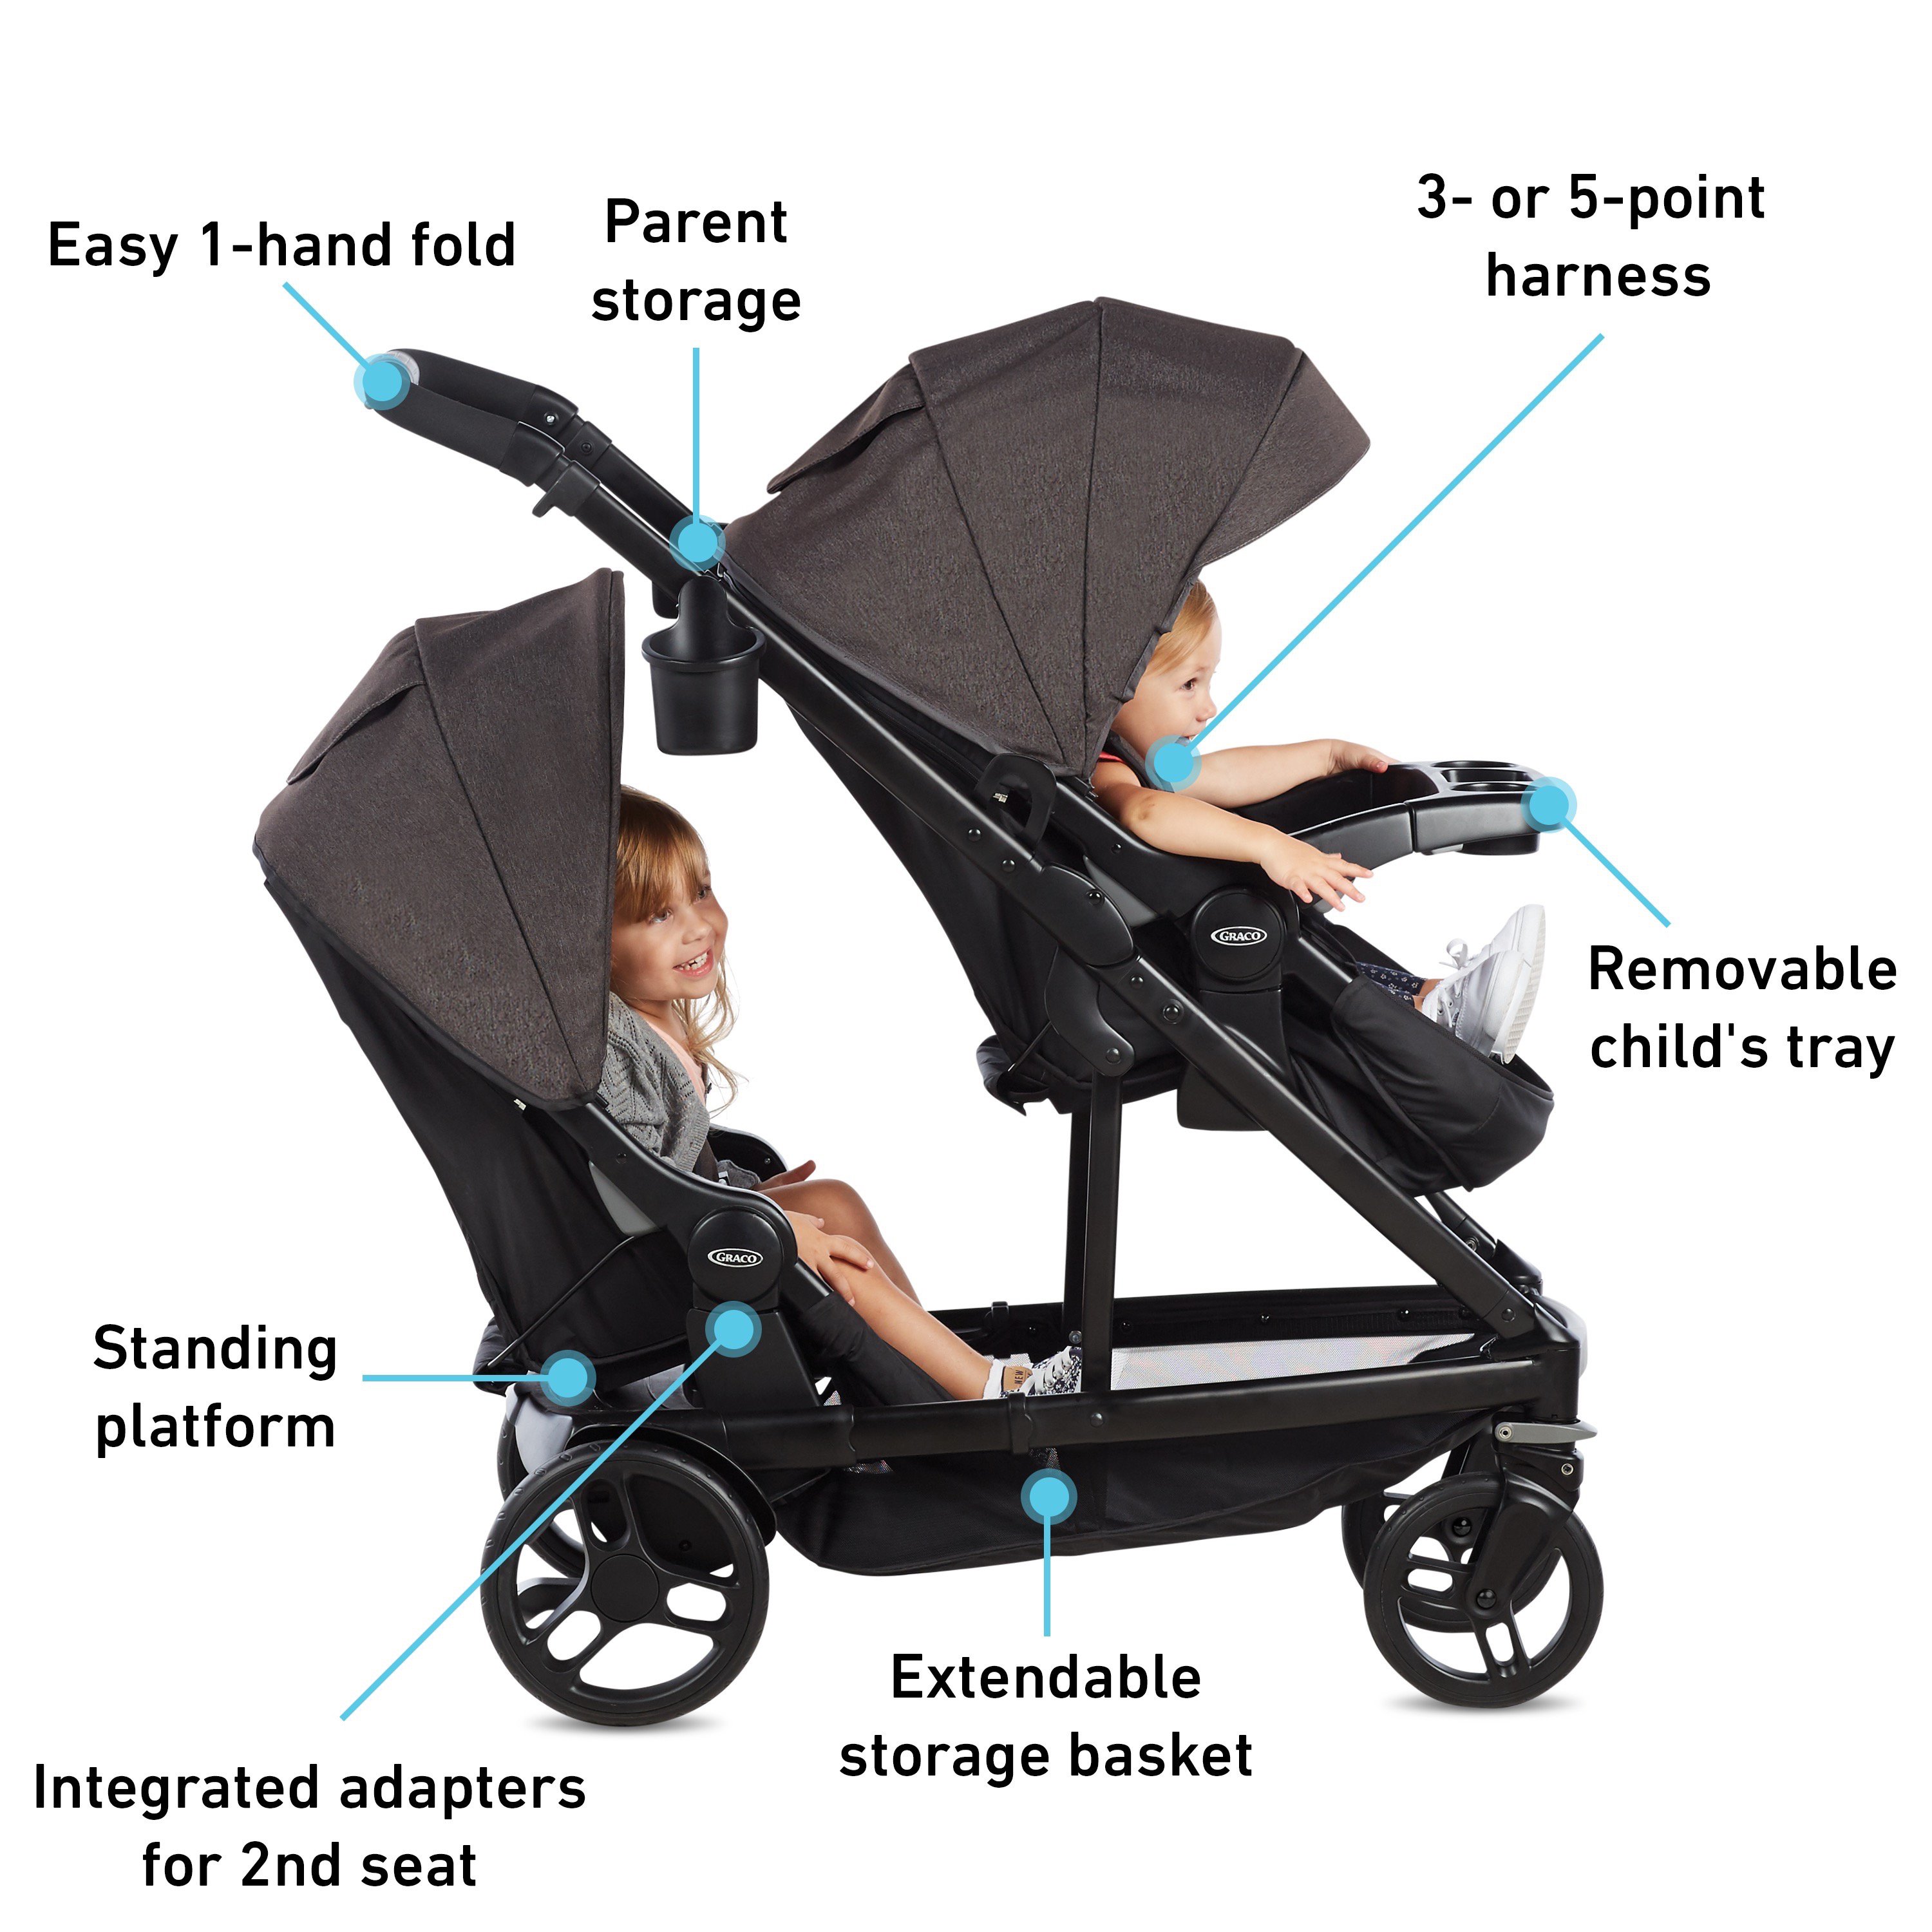 graco single to double stroller